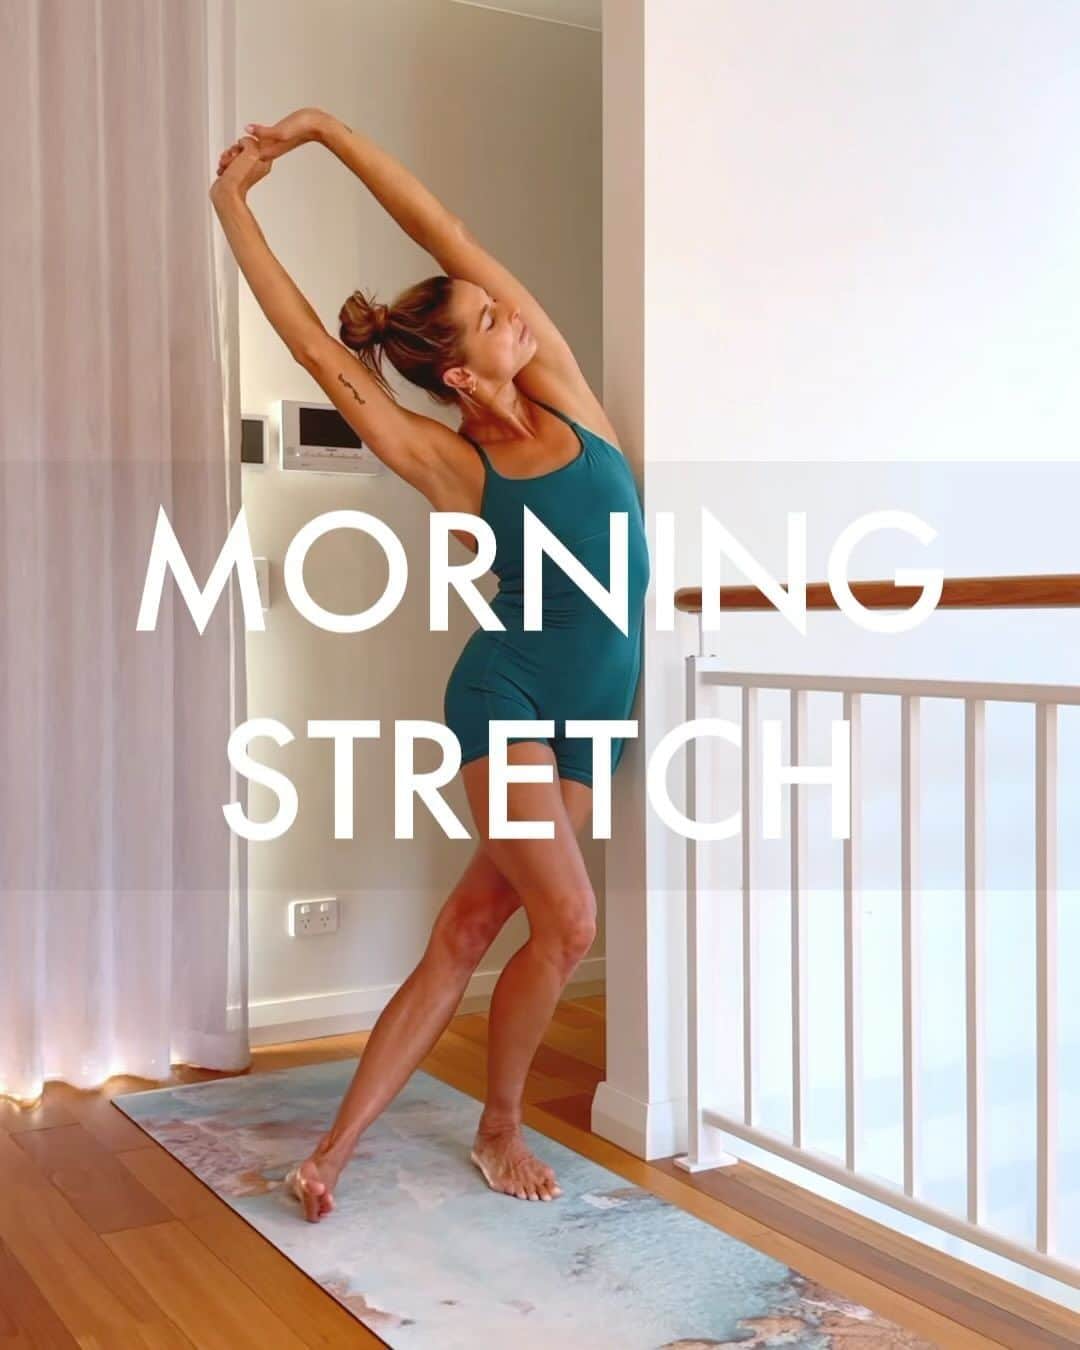 Amanda Biskのインスタグラム：「MORNING STRETCHES ☀️ Wake up your body, release tension & feel more mobile with this juicy wall stretch series 😌  ✨1. SIDE STRETCH  - lean your hip into the wall will all your weight - keep your core engaged (belly button in!) - straight leg is active (knee squeezed, foot flexed) ADD ROTATION - improves spinal mobility - relieves back tightness  ✨2. KNEELING ROTATION - hip touching the wall - reach arms wide ADD STRETCH - pull your belly button in and push hips forward - helps to open hip flexors & relieve back pain  ✨3. KNEELING HIP FLEXOR - an even deeper hip flexor stretch - keep your core engaged - reach UP more than you are reaching back WALL TOUCH - if your hands reach the wall, aim to sink the hips DOWN and pull the belly button in  ✨4. FORWARD FOLD - hips on wall with all bodyweight - hold straight legs for 3 breaths - bend & straighten for 6 breaths - hold bent legs for 3 breaths - hold straight legs & reach for wall for 3 breaths  This is such an amazing way to start your day 🤩 You’ll feel energised, decompressed, mobile & focused ✨✨✨ #morningstretches #morningyoga #flexibility #backpain  ab❤️x  Music: Right Now - Vandelux Wearing: Sweat to Splash Onesie from @nimbleactivewear 🌲」